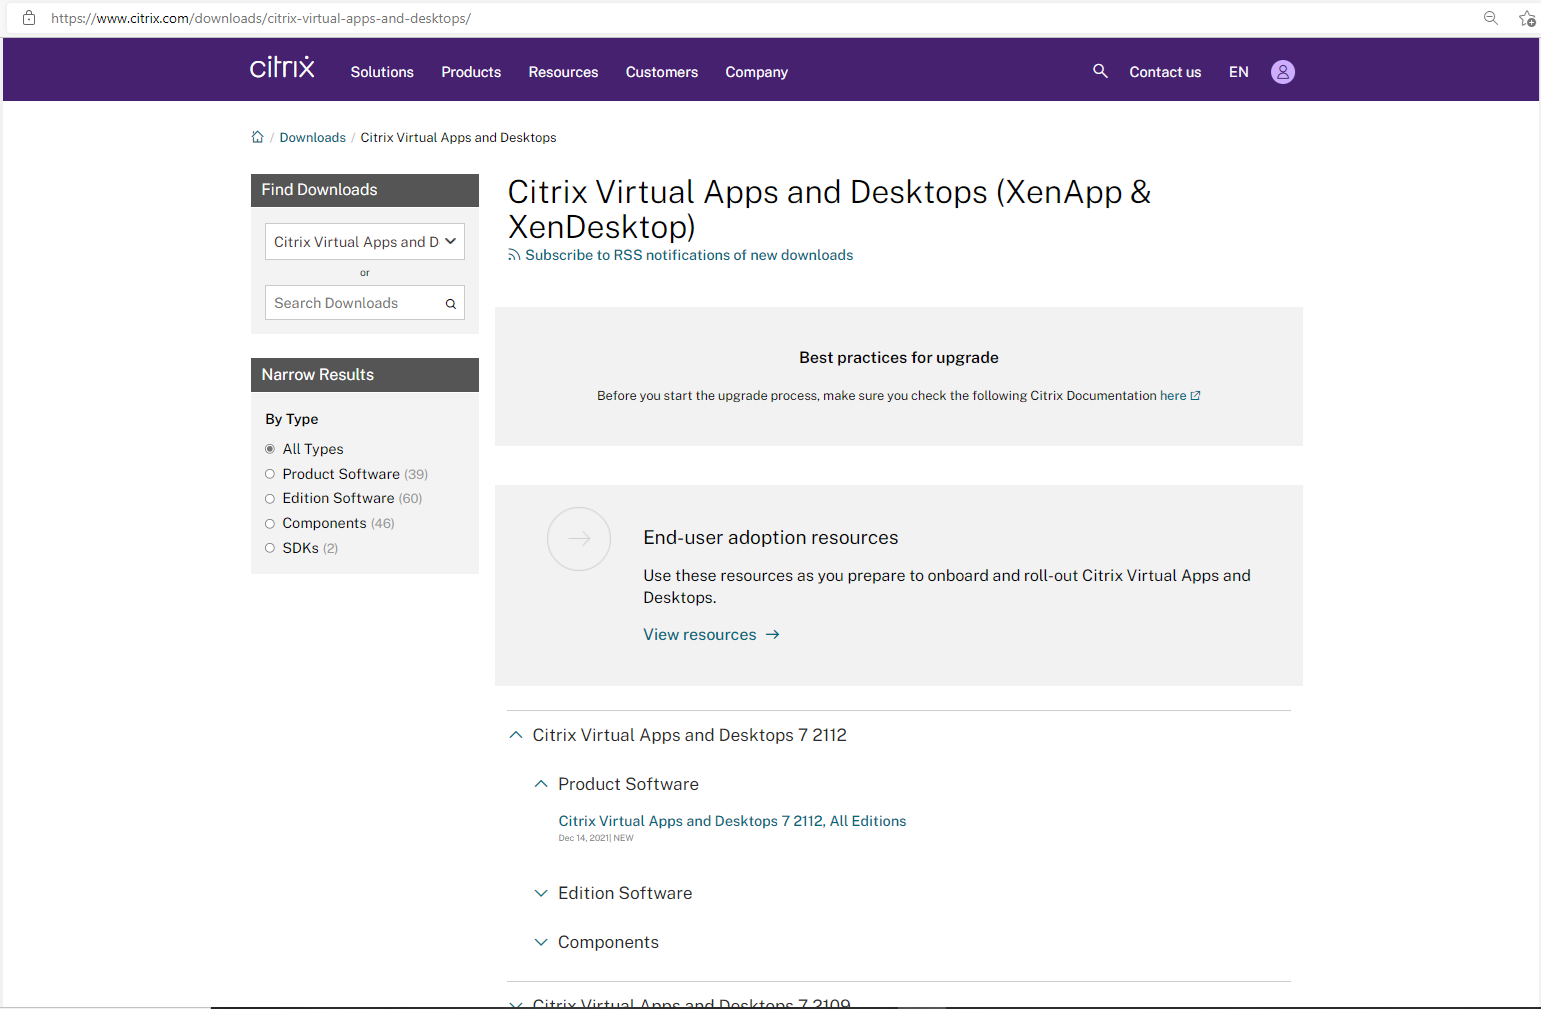 012422 1824 Howtoupgrad5 - How to upgrade to Citrix Virtual Apps 7 2112